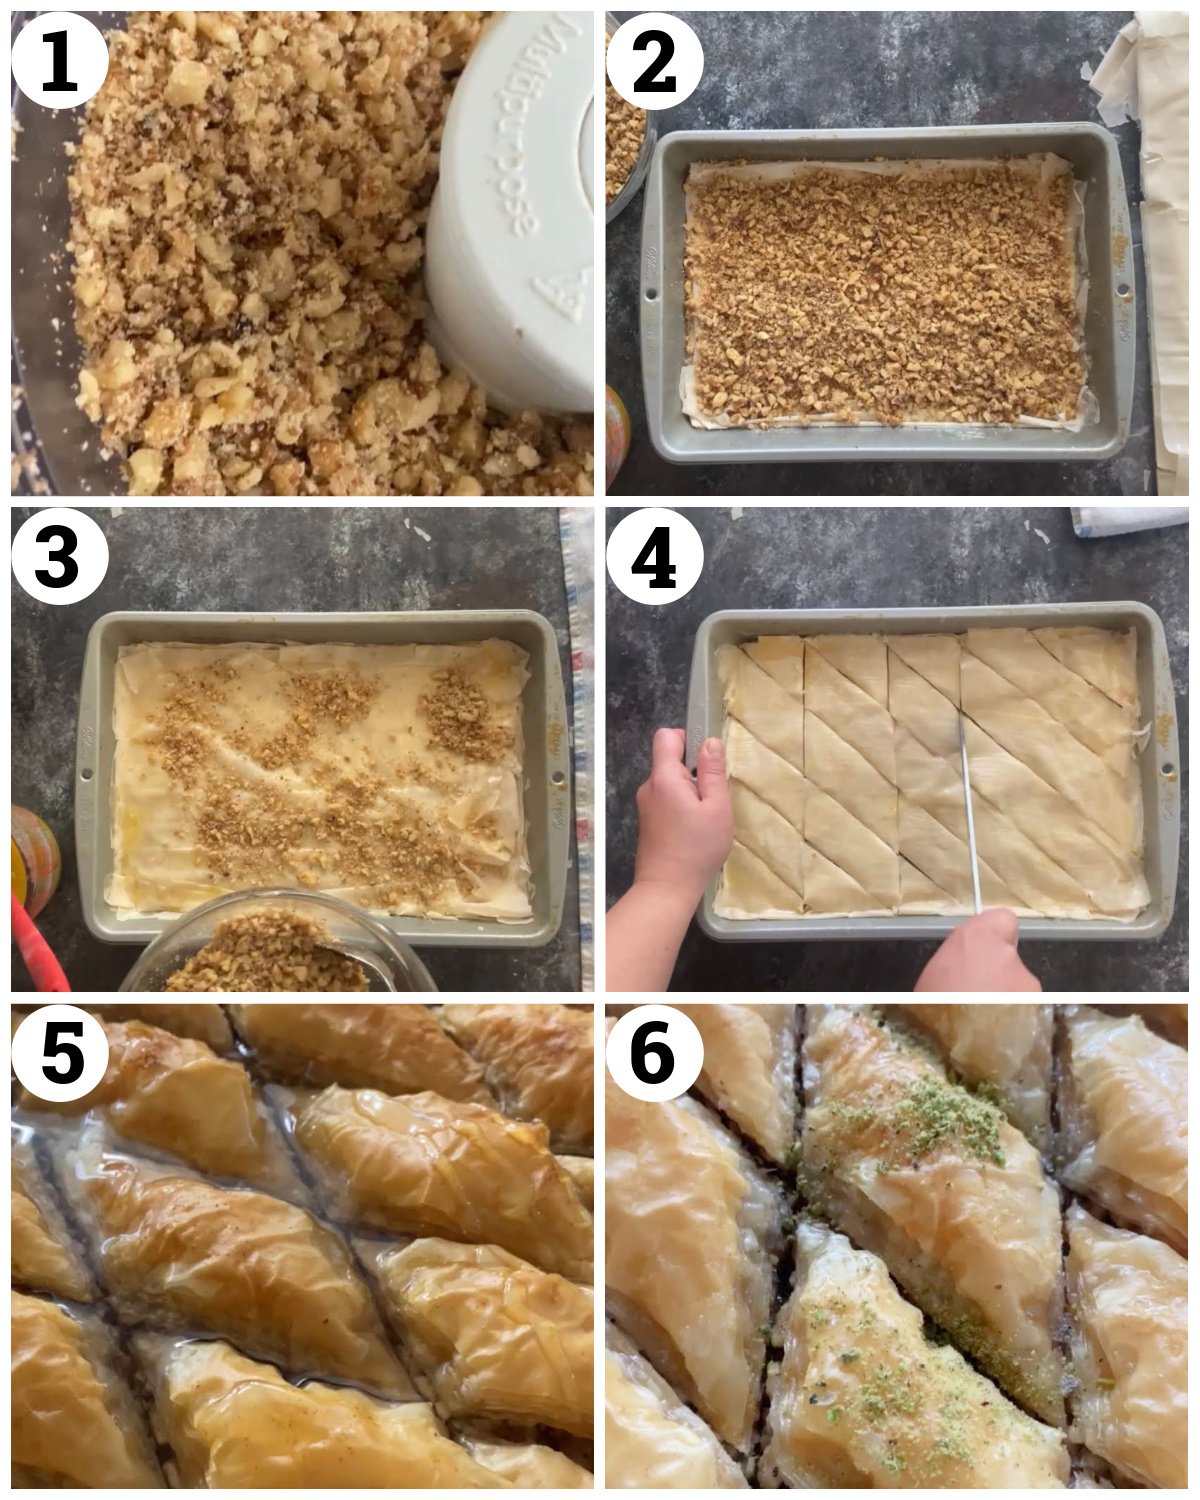 chop the nuts and layer with phyllo dough, melted butter and the nut mix. Bake in the oven and drizzle the cold syrup on hot baklava. 